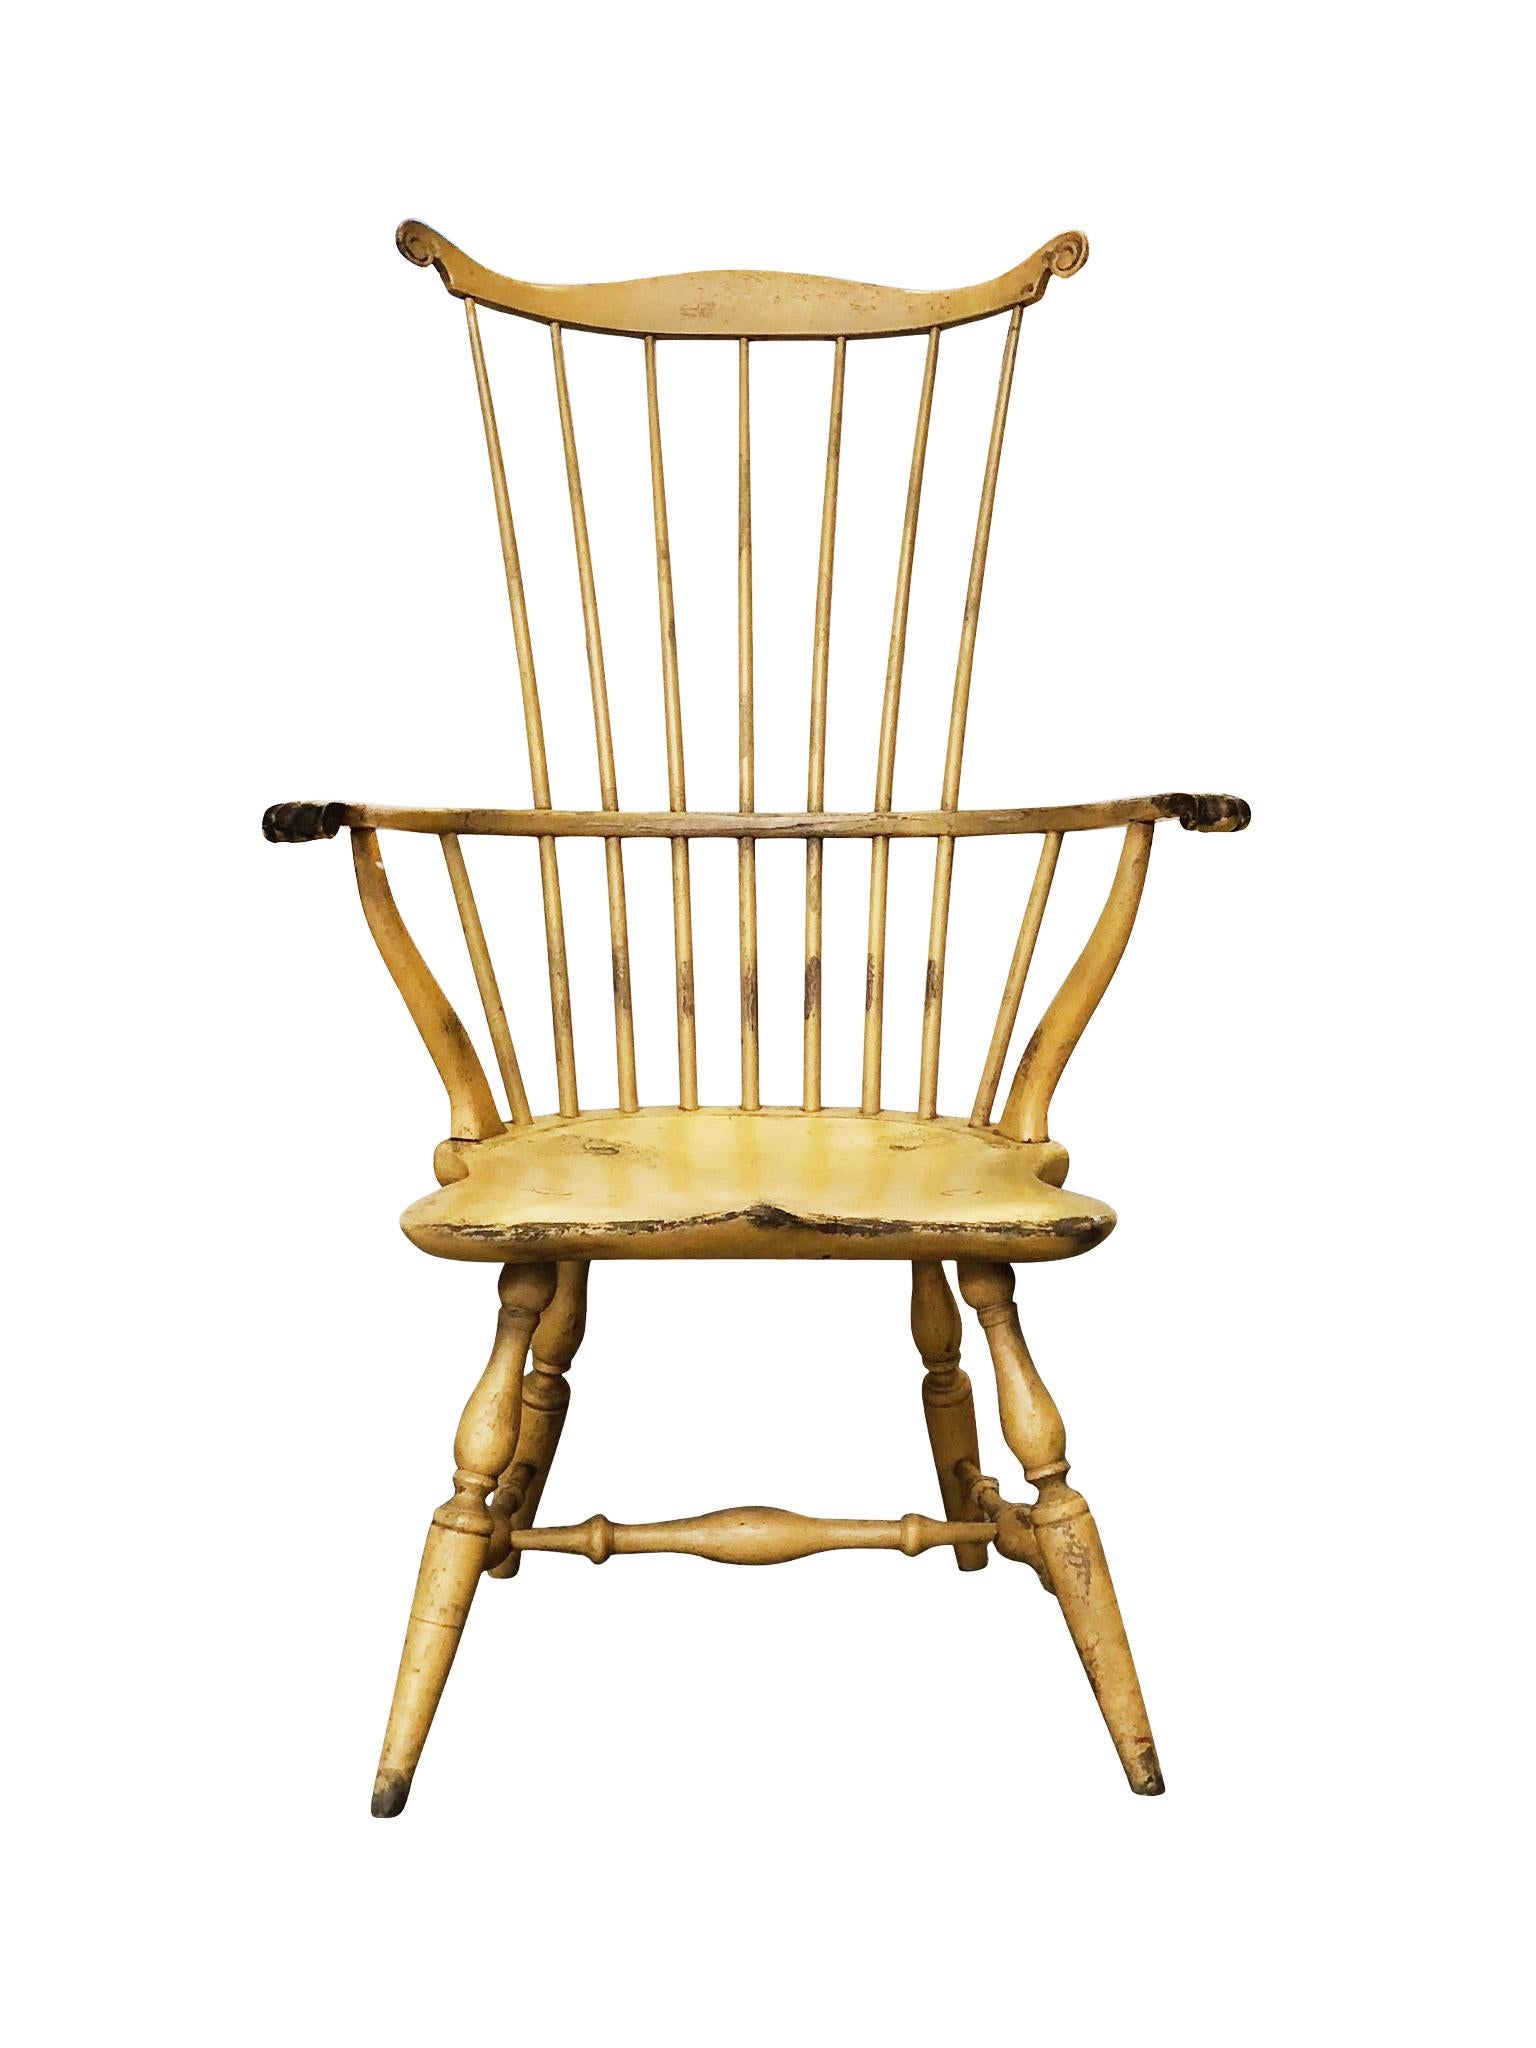 A Windsor-style chair handcrafted by Bill Wallick. Made from poplar wood and hand painted in a yellow coat that has been enriched with texture and wear over the years. The chair is faithful to a Classic Windsor design: a spindle back, a wing-tipped